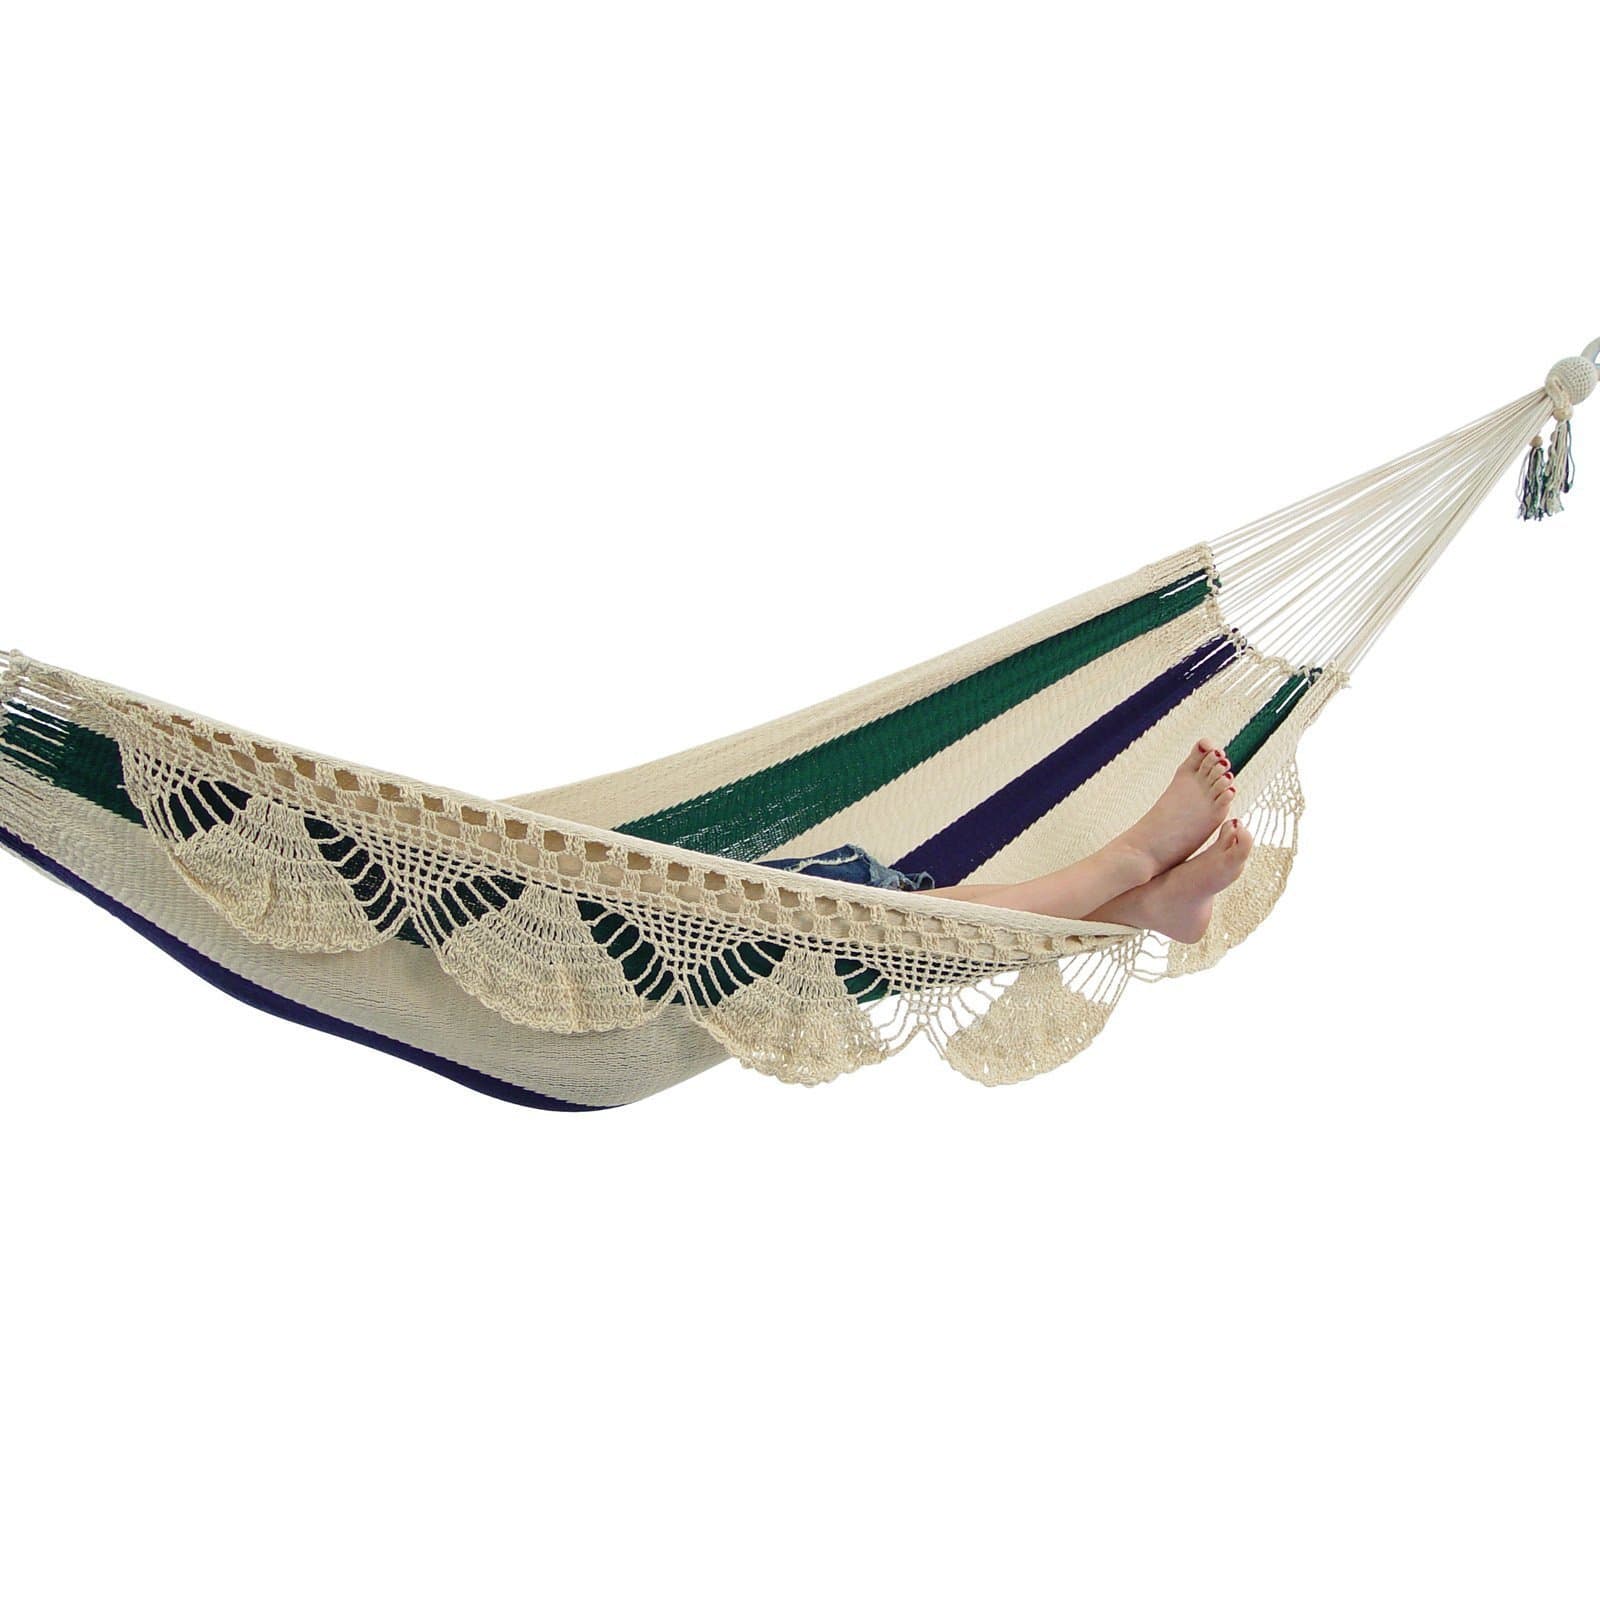 Hammock Universe Canada Nicaraguan Hammock - Deluxe blue-white-and-green-stripes / ca 738447505092 NHD-BWGS